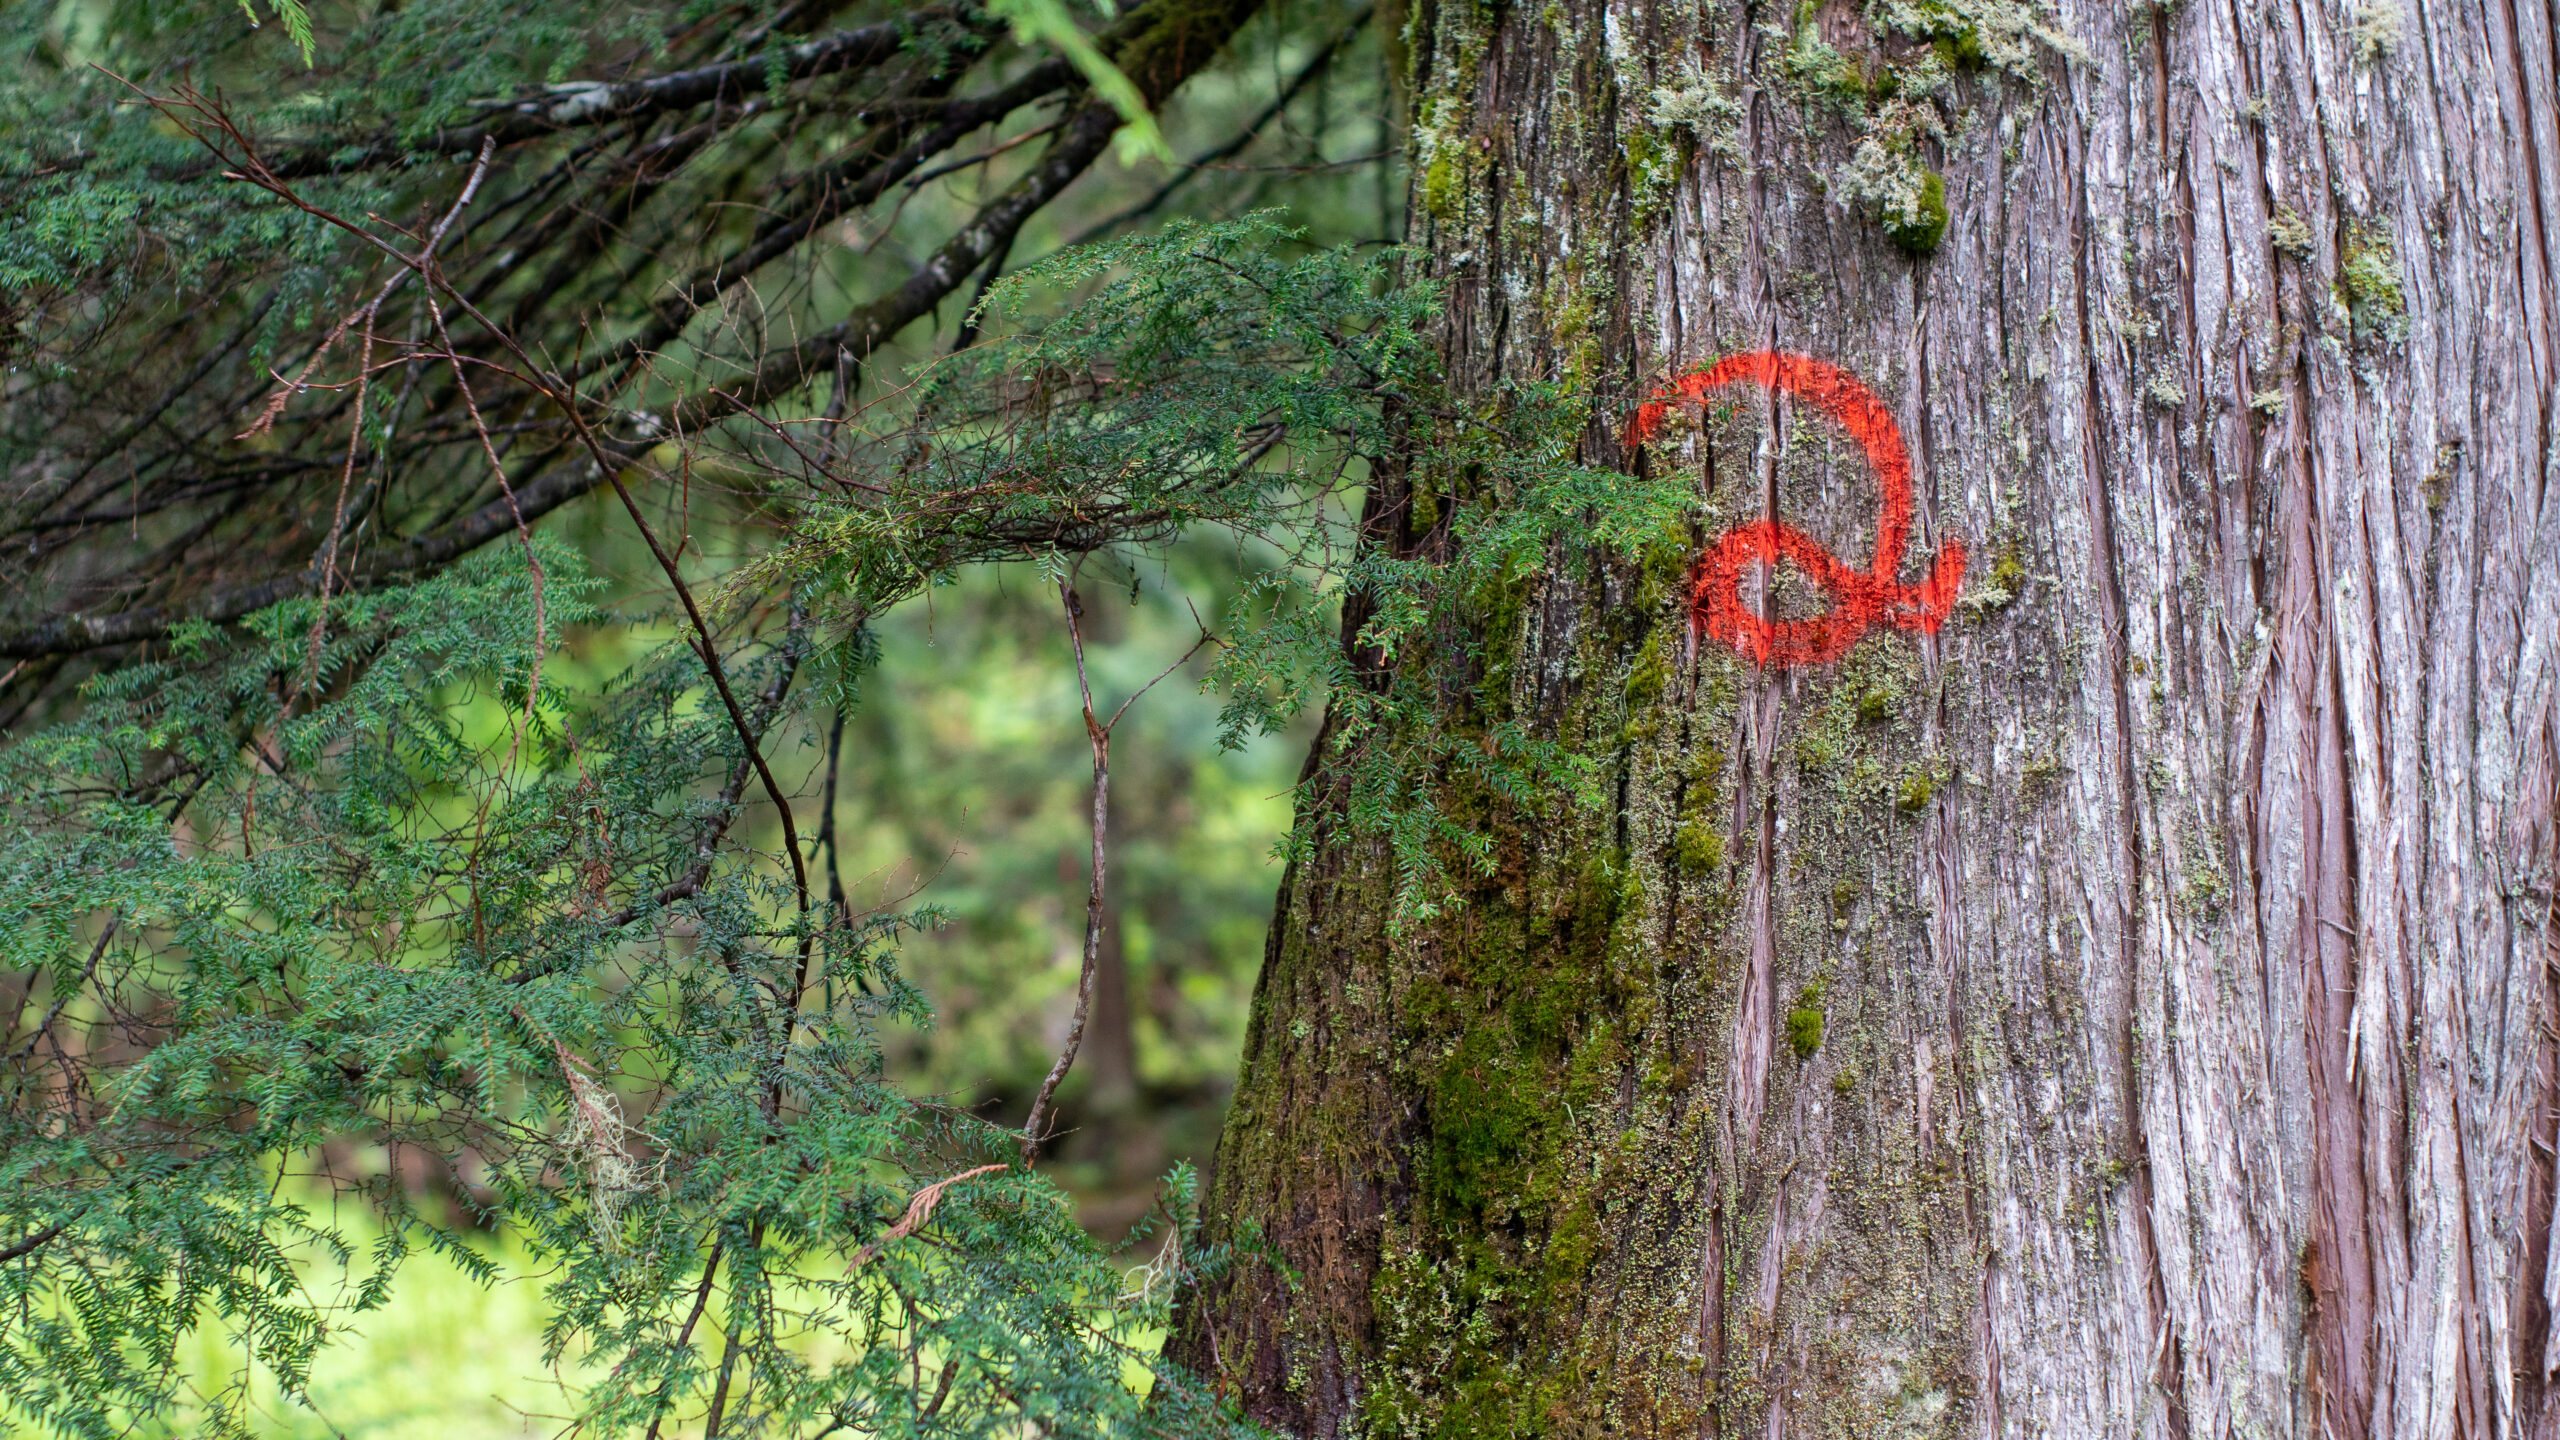 Spraypaint marks an old-growth cedar tree that will be measured to determine logging volumes